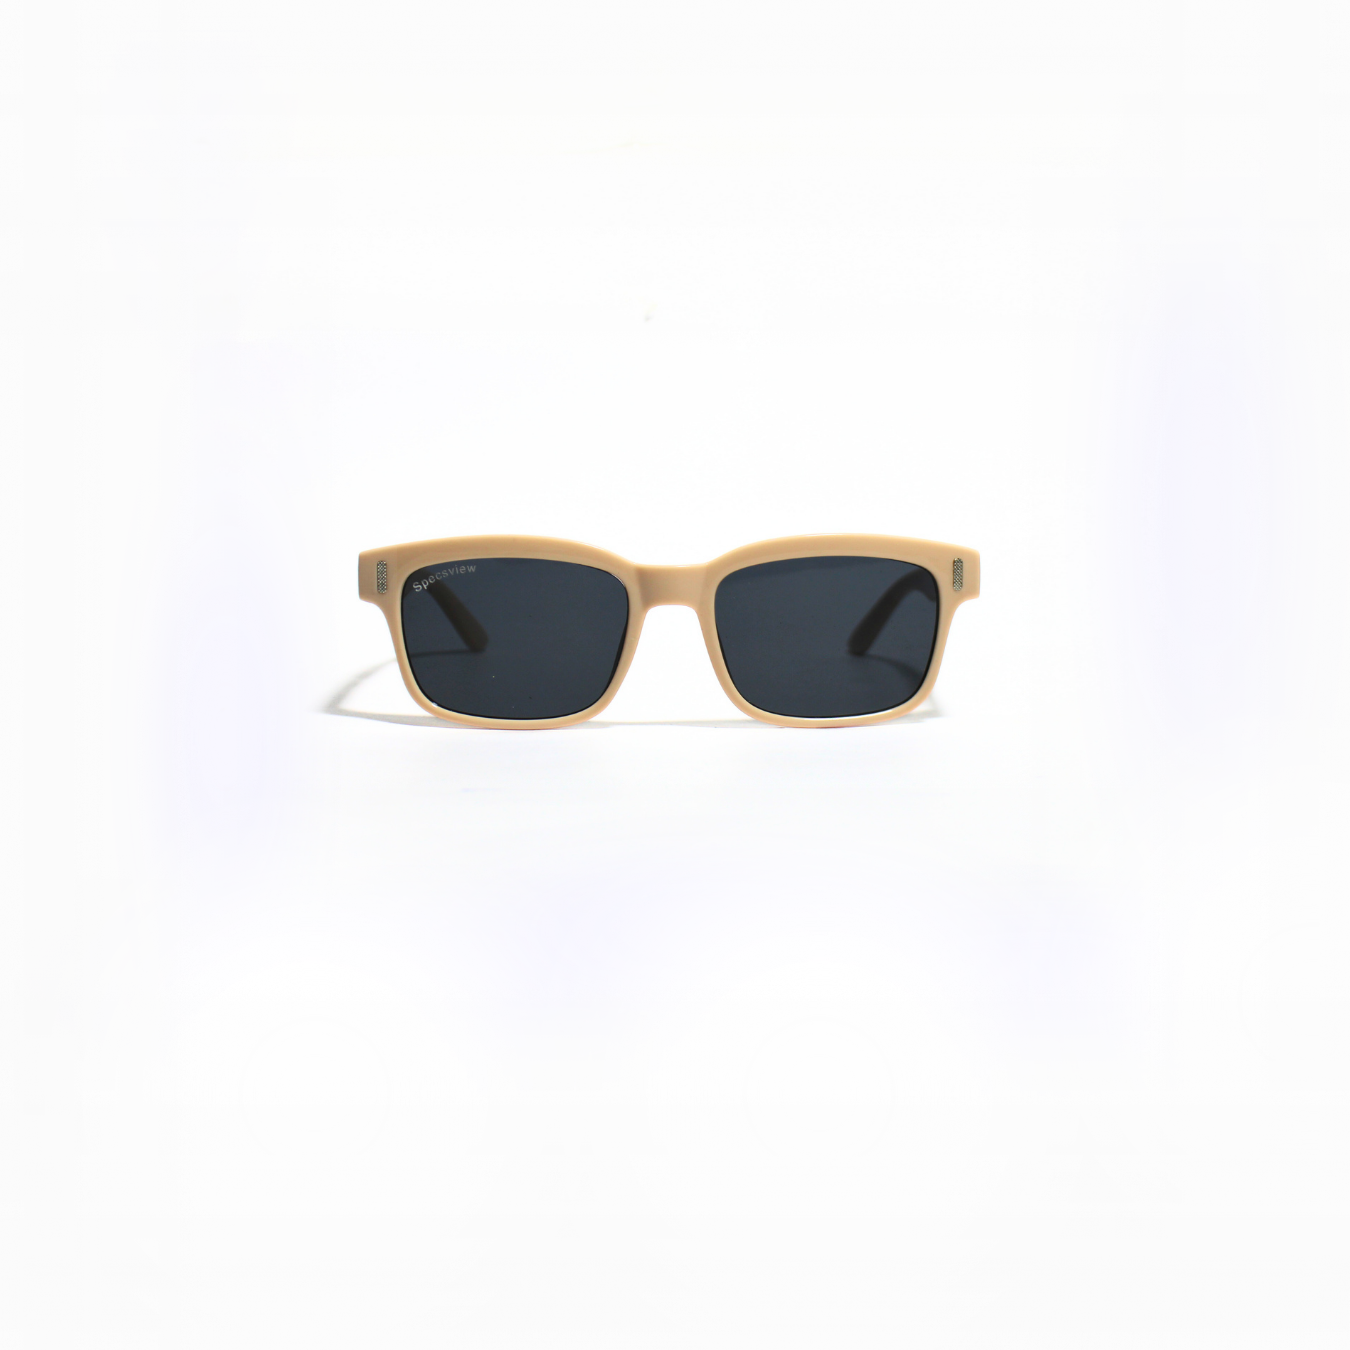 SPECTRE//005 I Sunglasses for Men and Women - Specsview